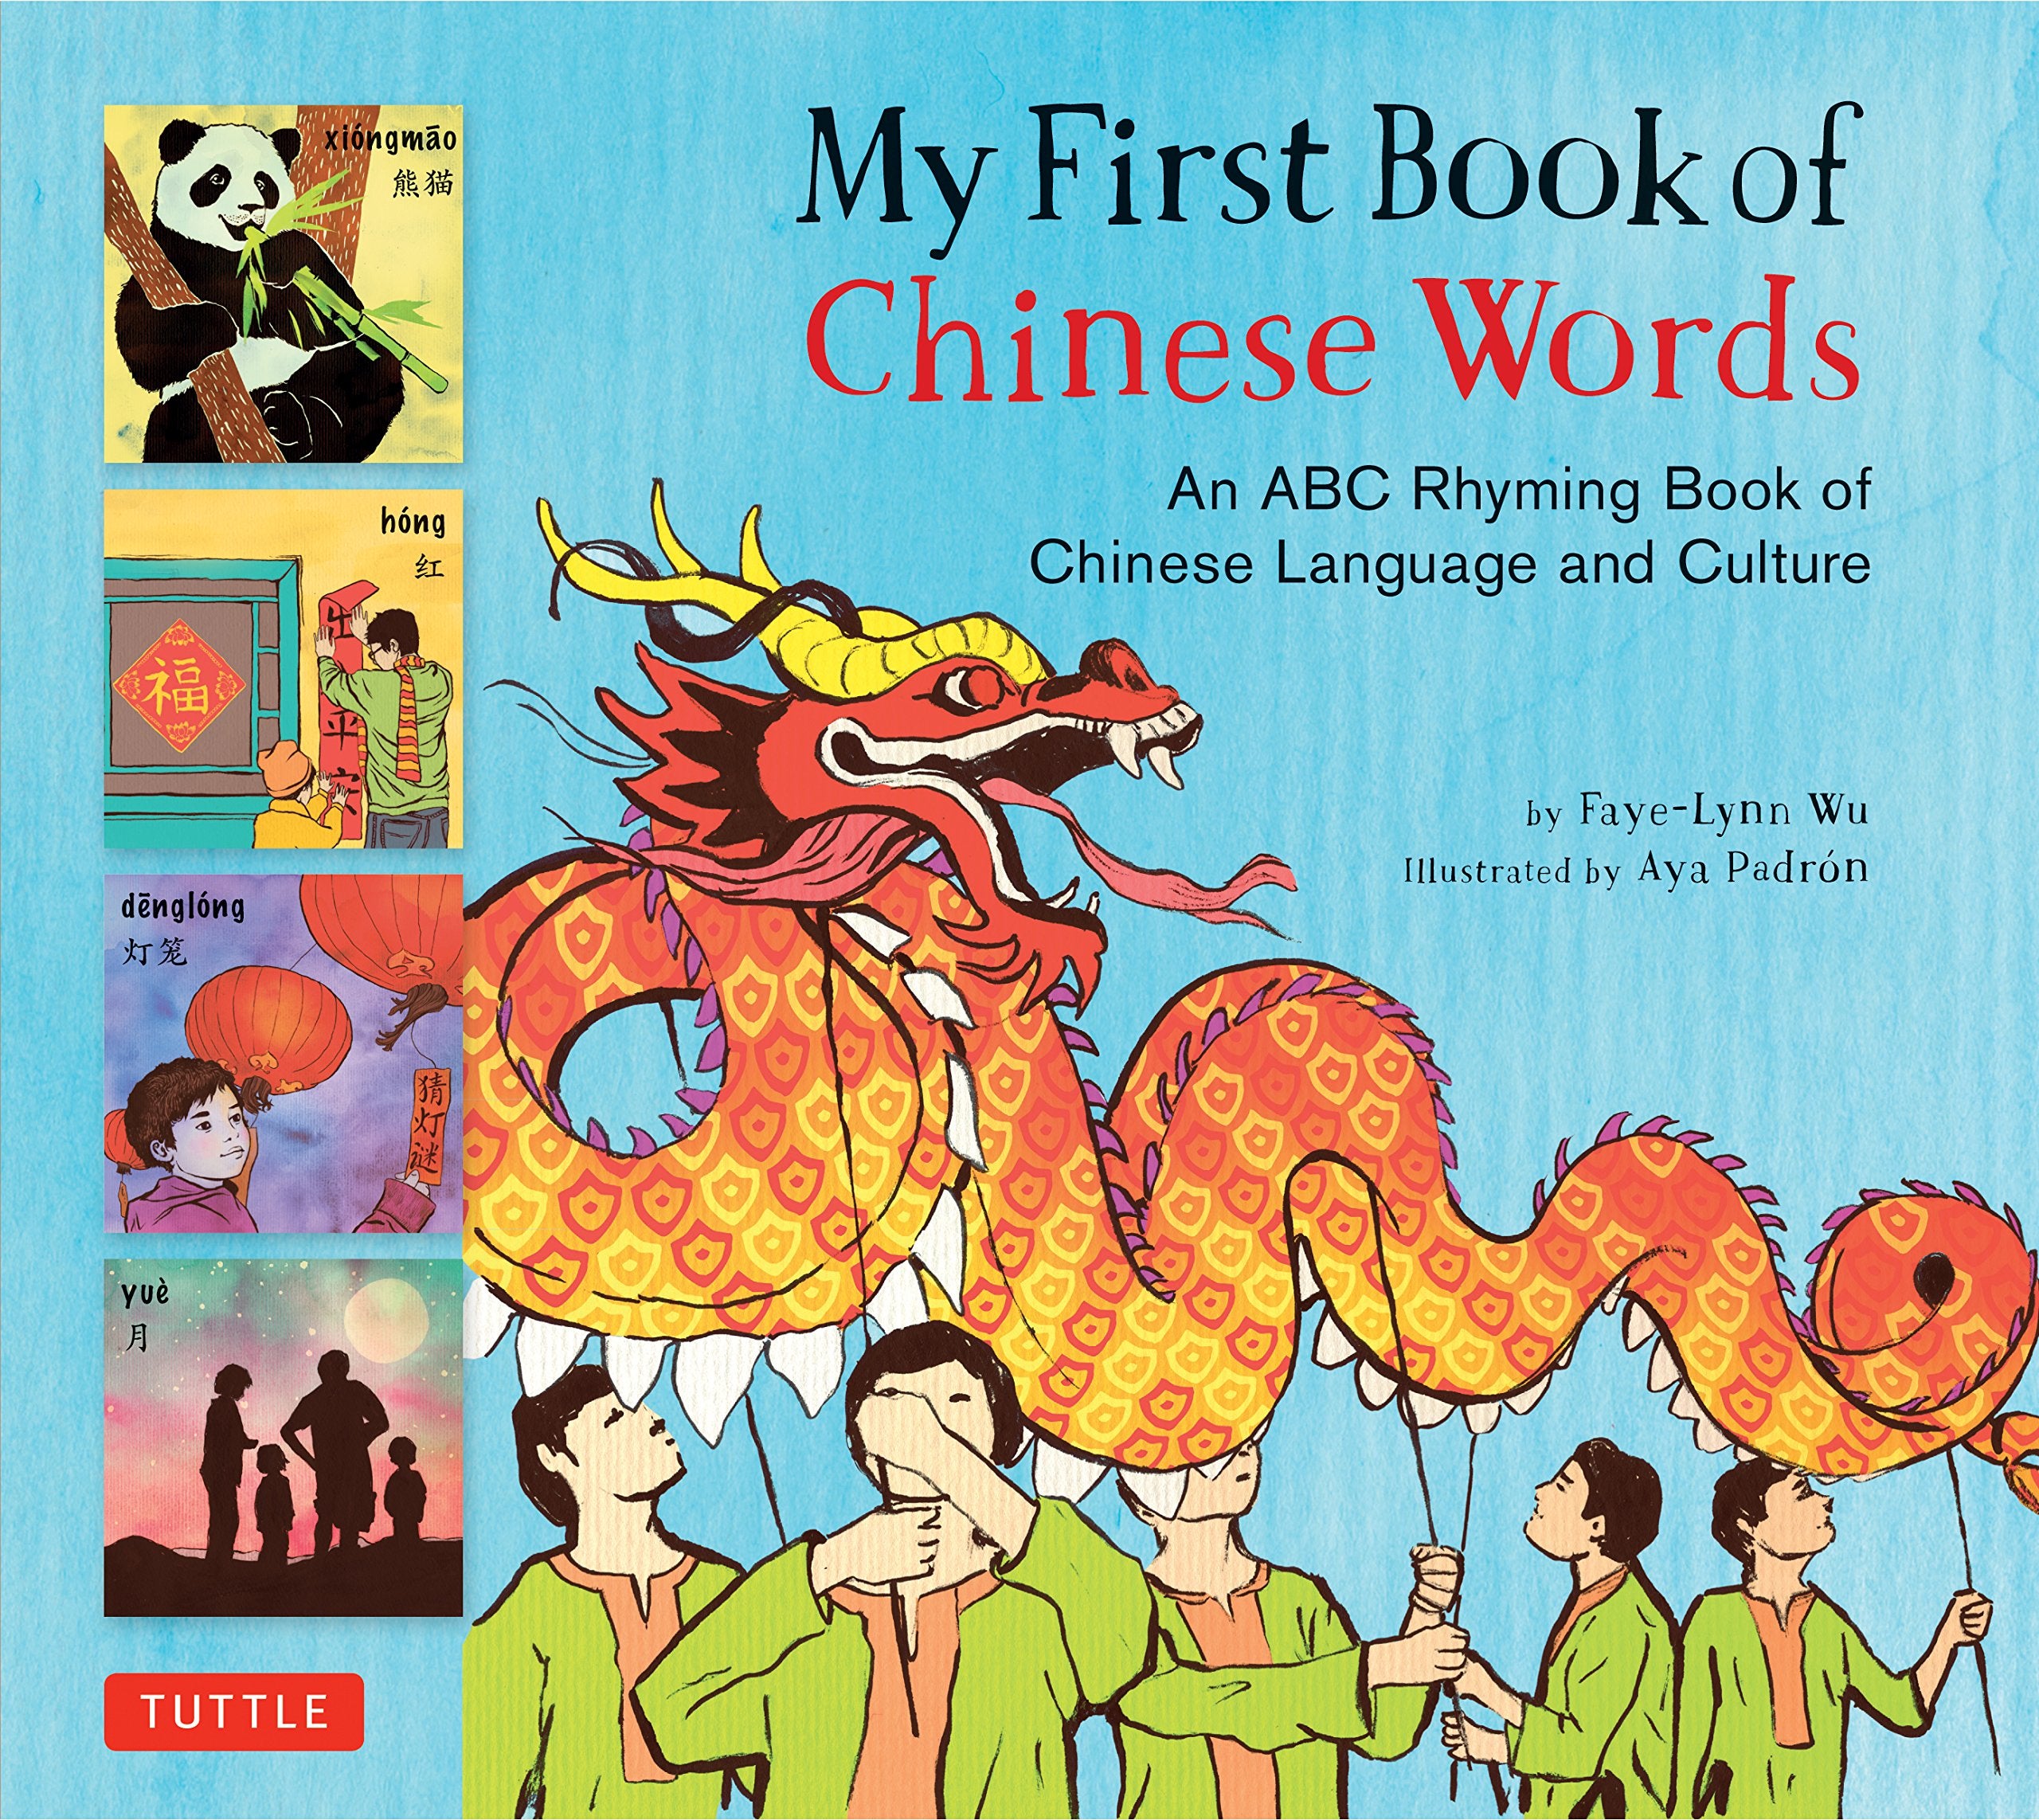 My First Book of Chinese Words: An ABC Rhyming Book of Chinese Language and Culture